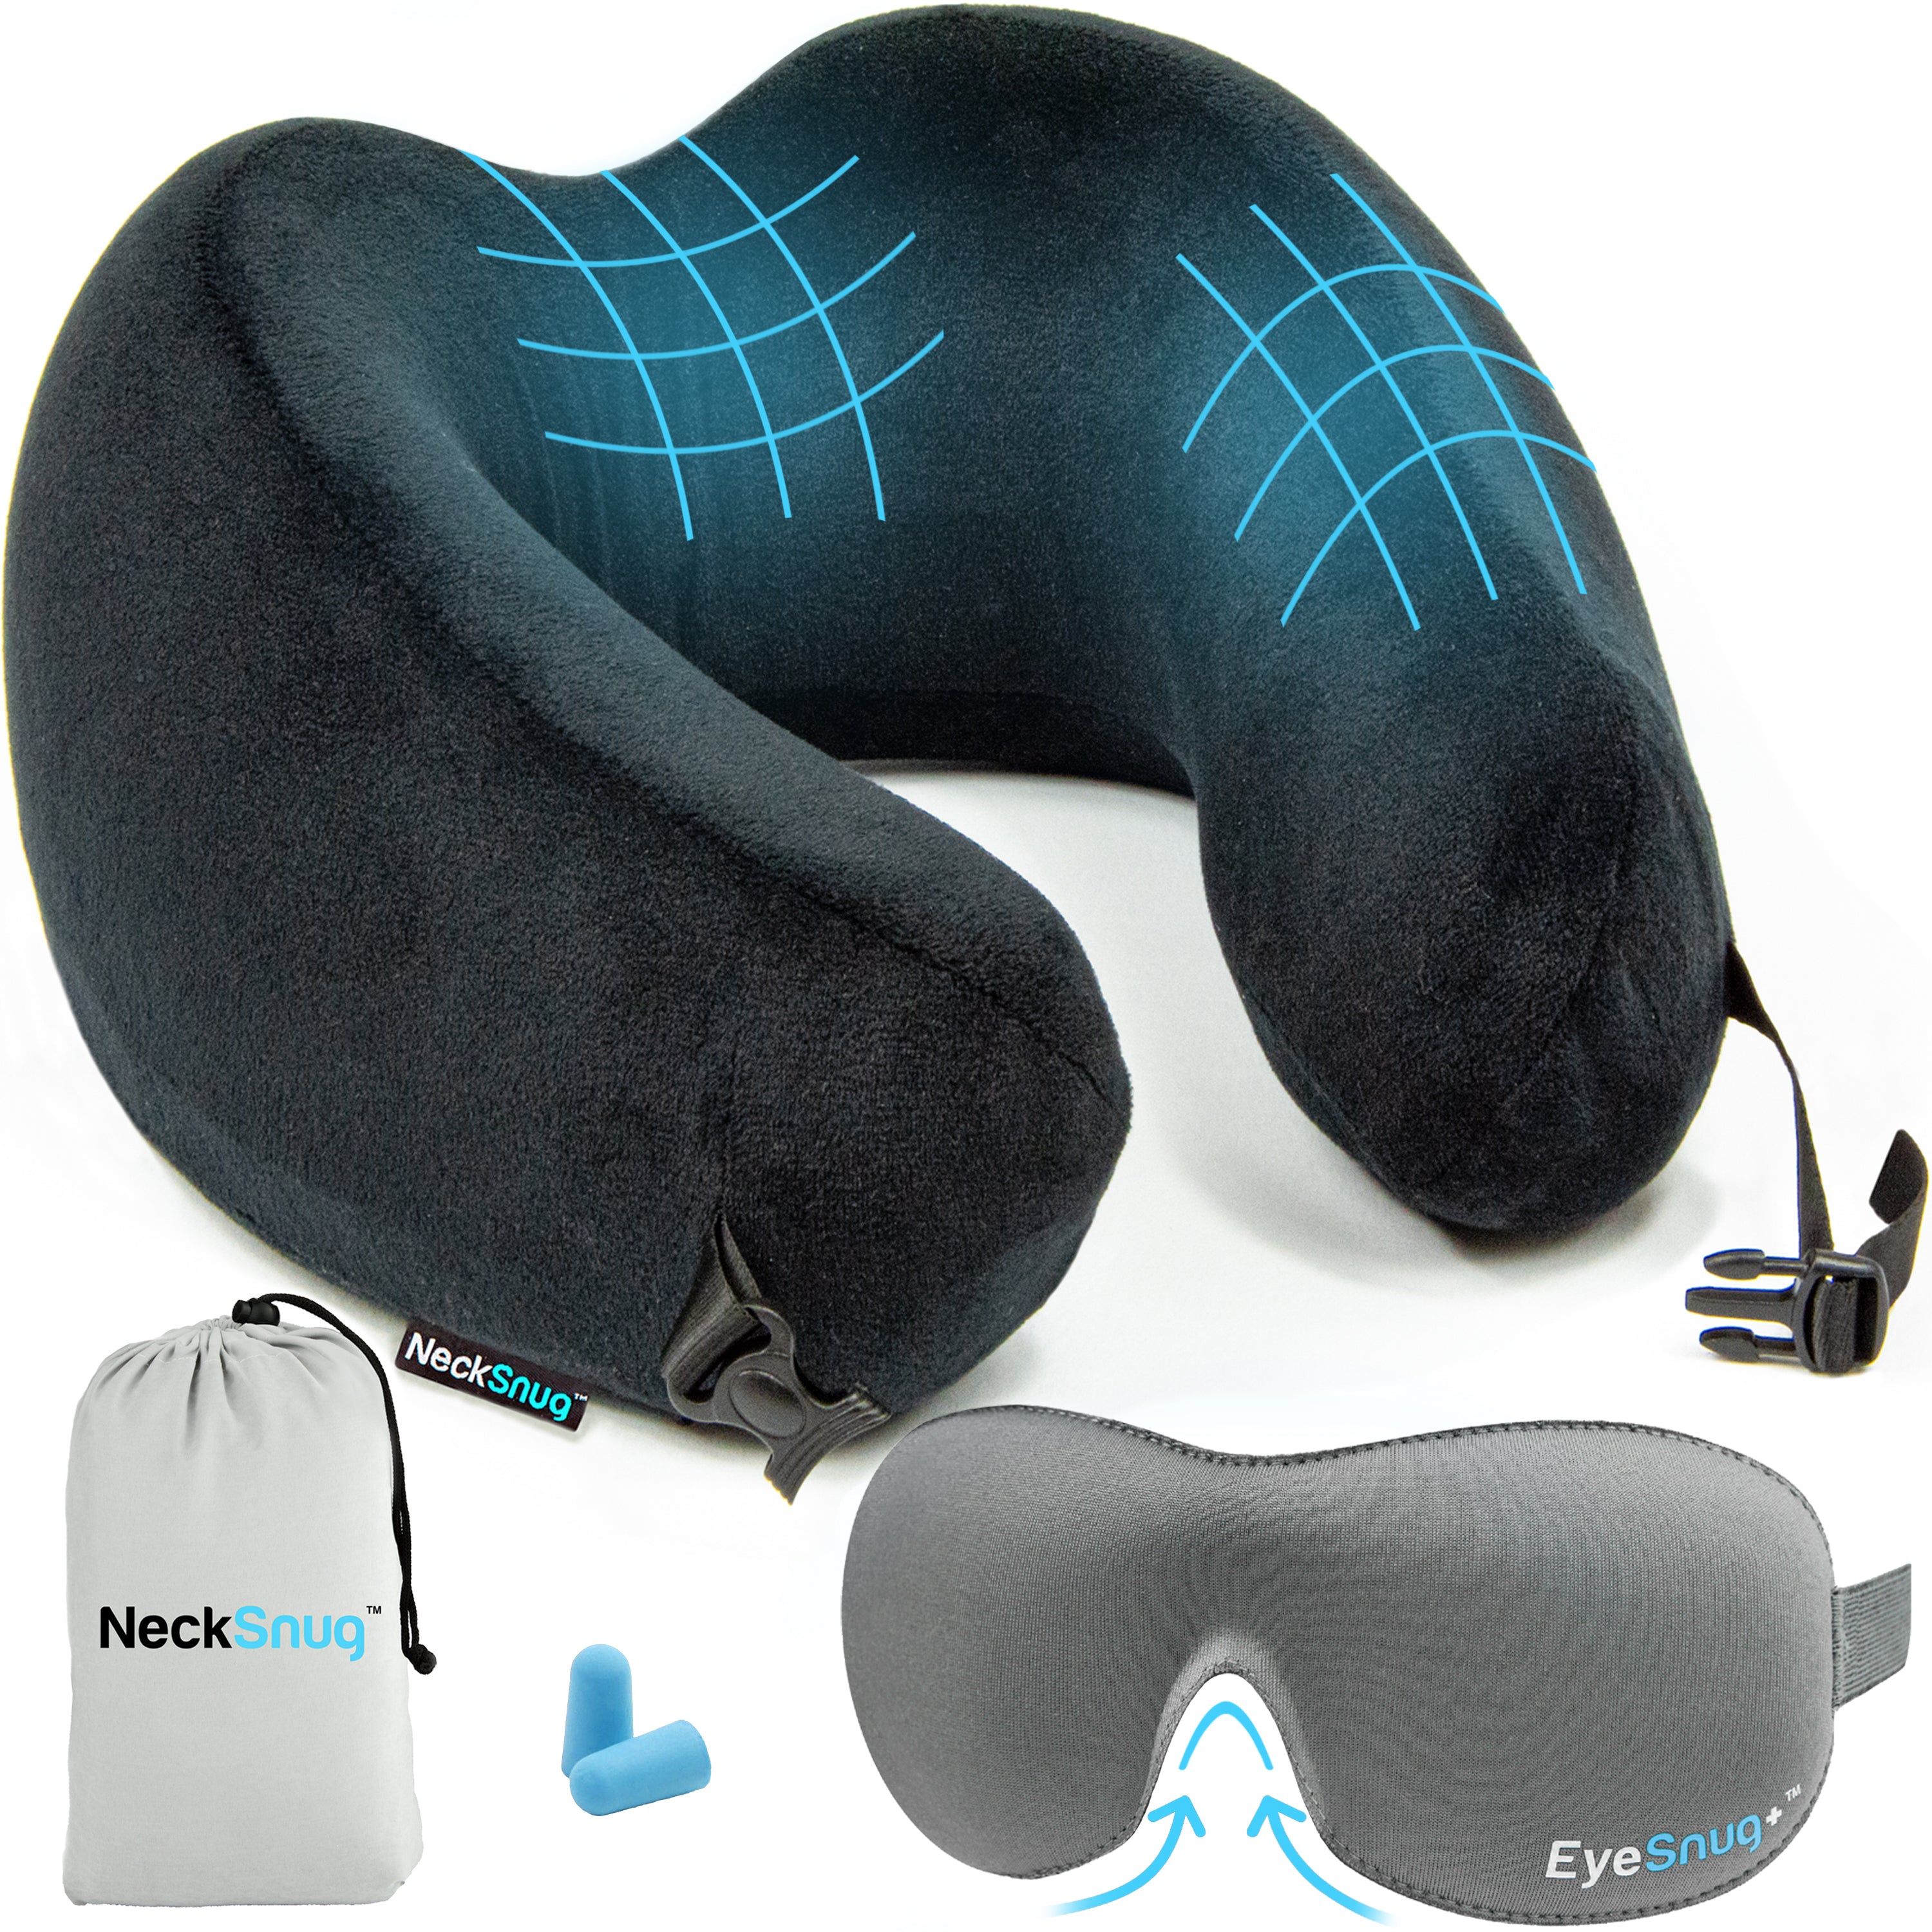 Travel Pillow With Massage,Memory Foam Neck Pillow For Sleeping